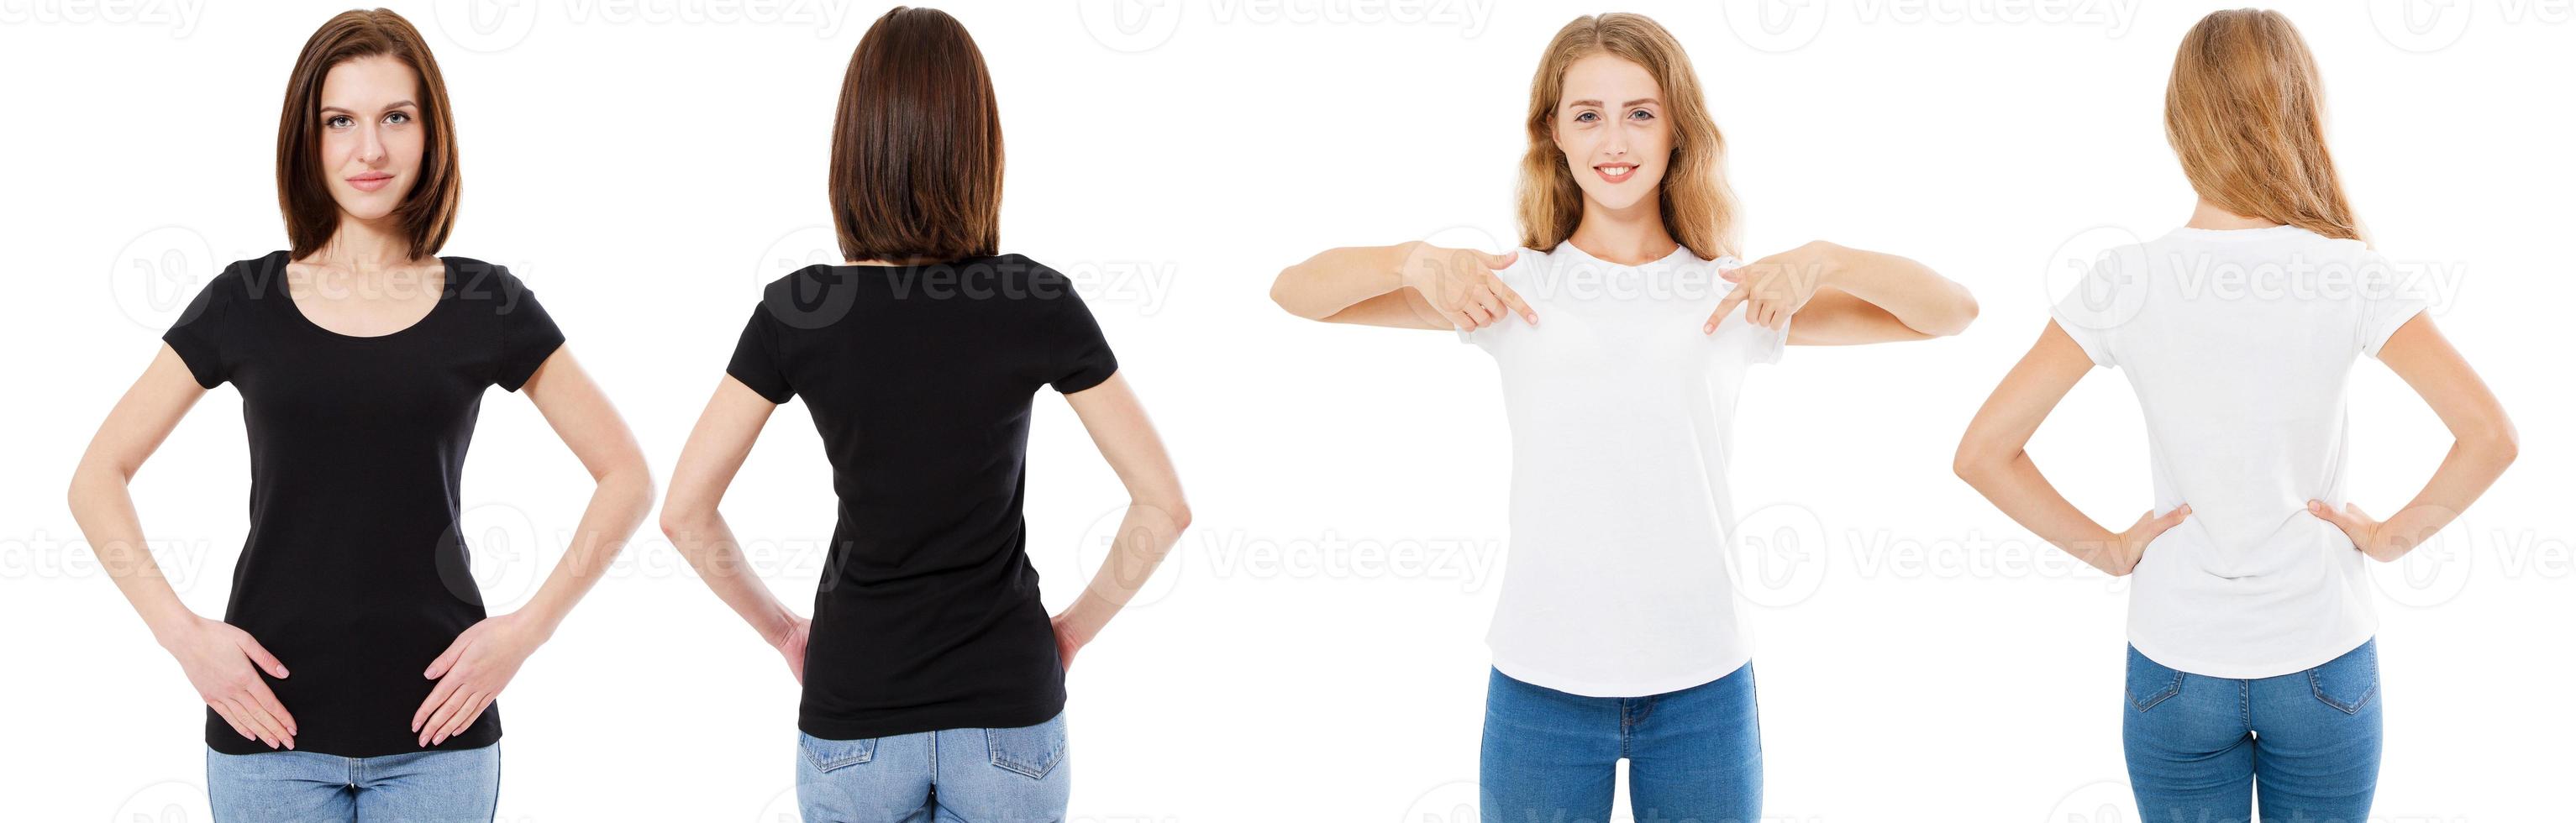 T-shirt set. Front and back view Brunette and Blonde in white and black t shirt isolated. Two girl in blank shirt, Mock up, Collage, Copy space, Template photo